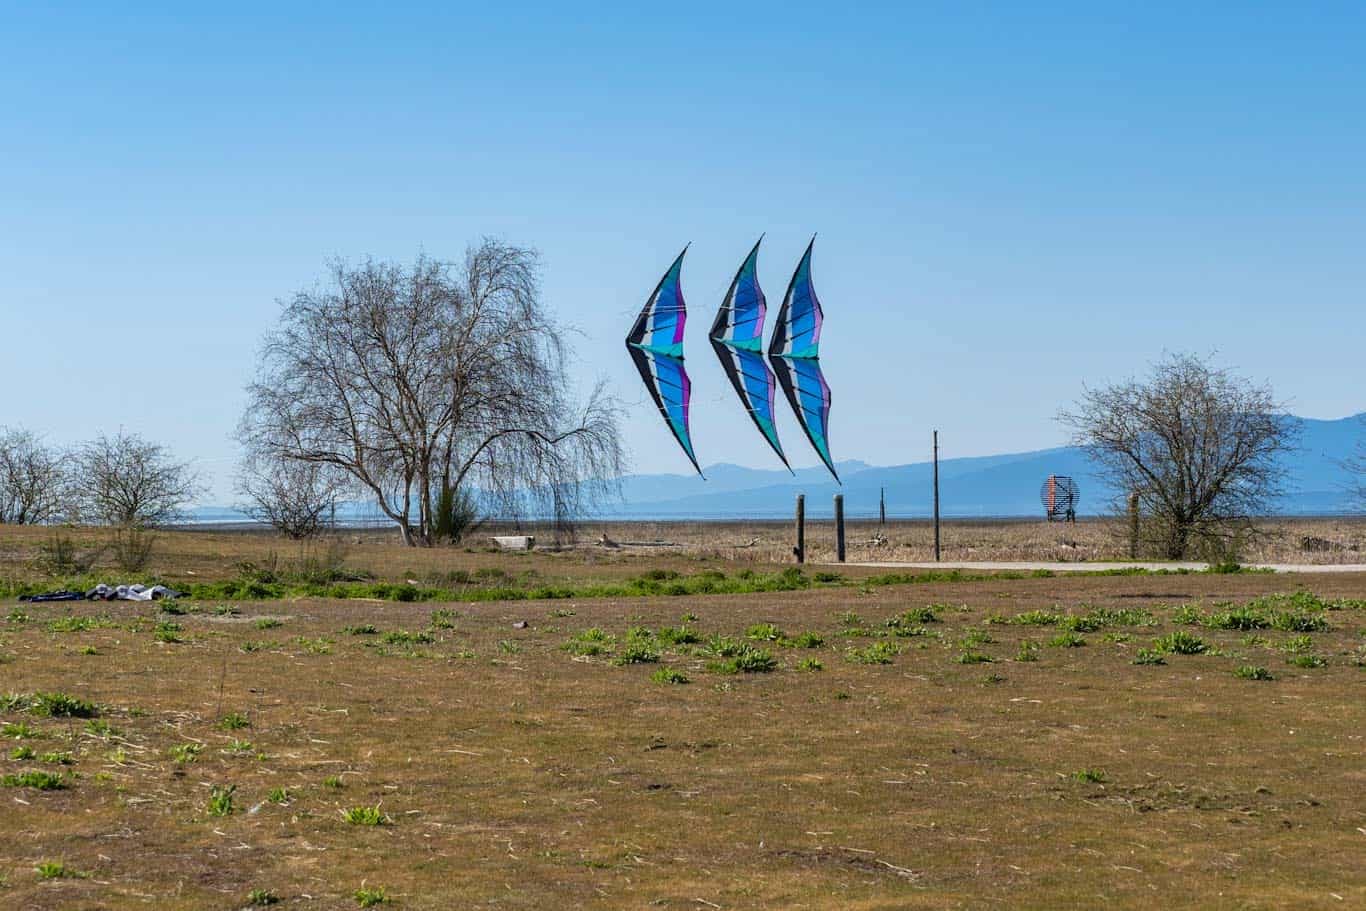 Large triple kite in blue over grass field